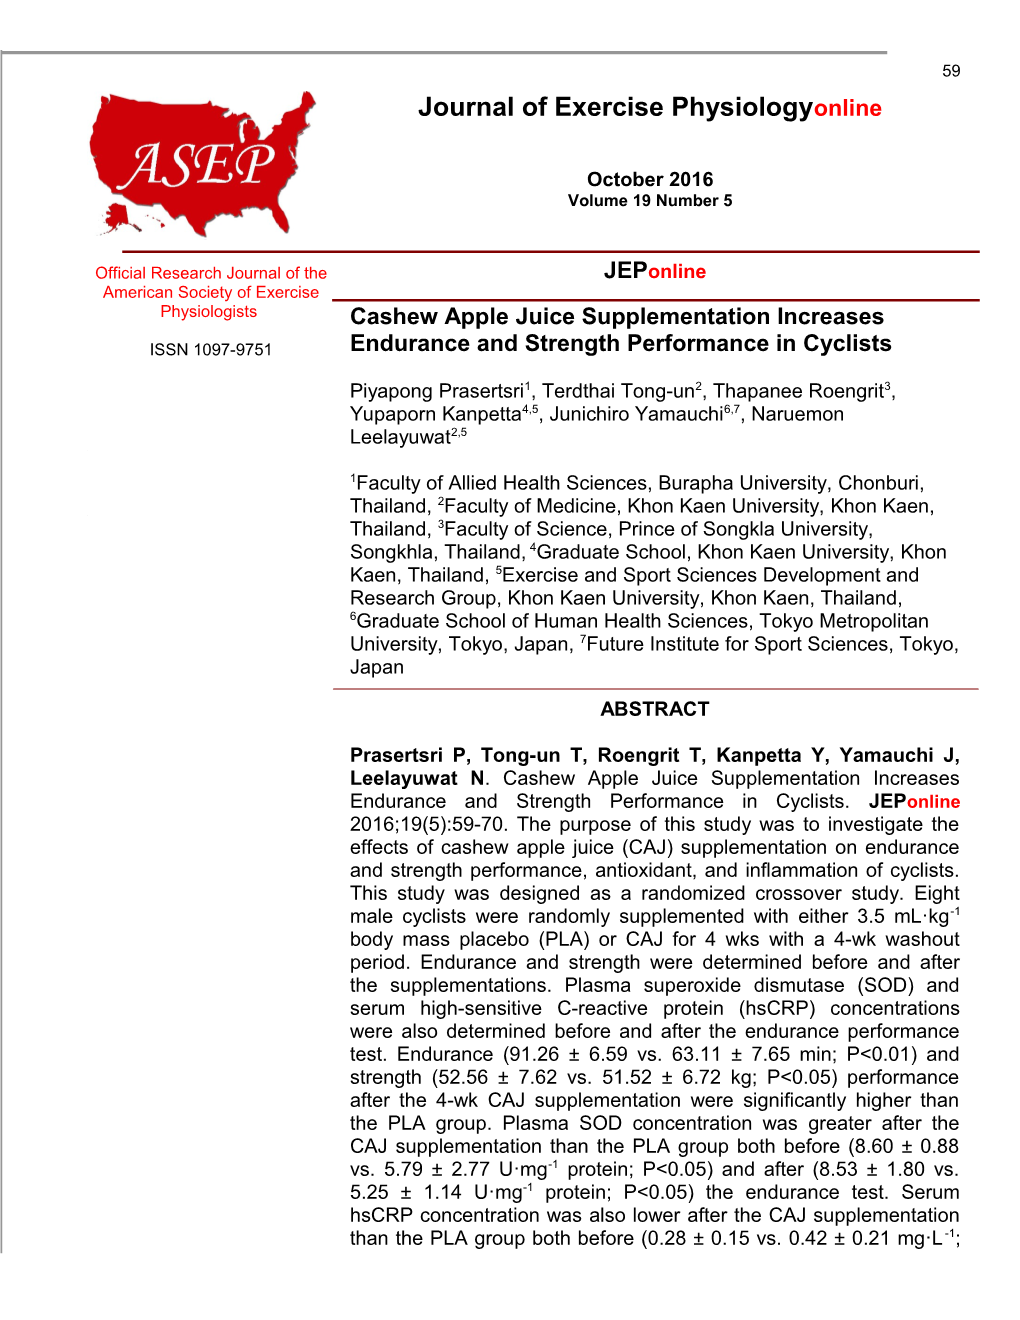 Cashew Apple Juice Supplementation Increases Endurance and Strength Performance in Cyclists